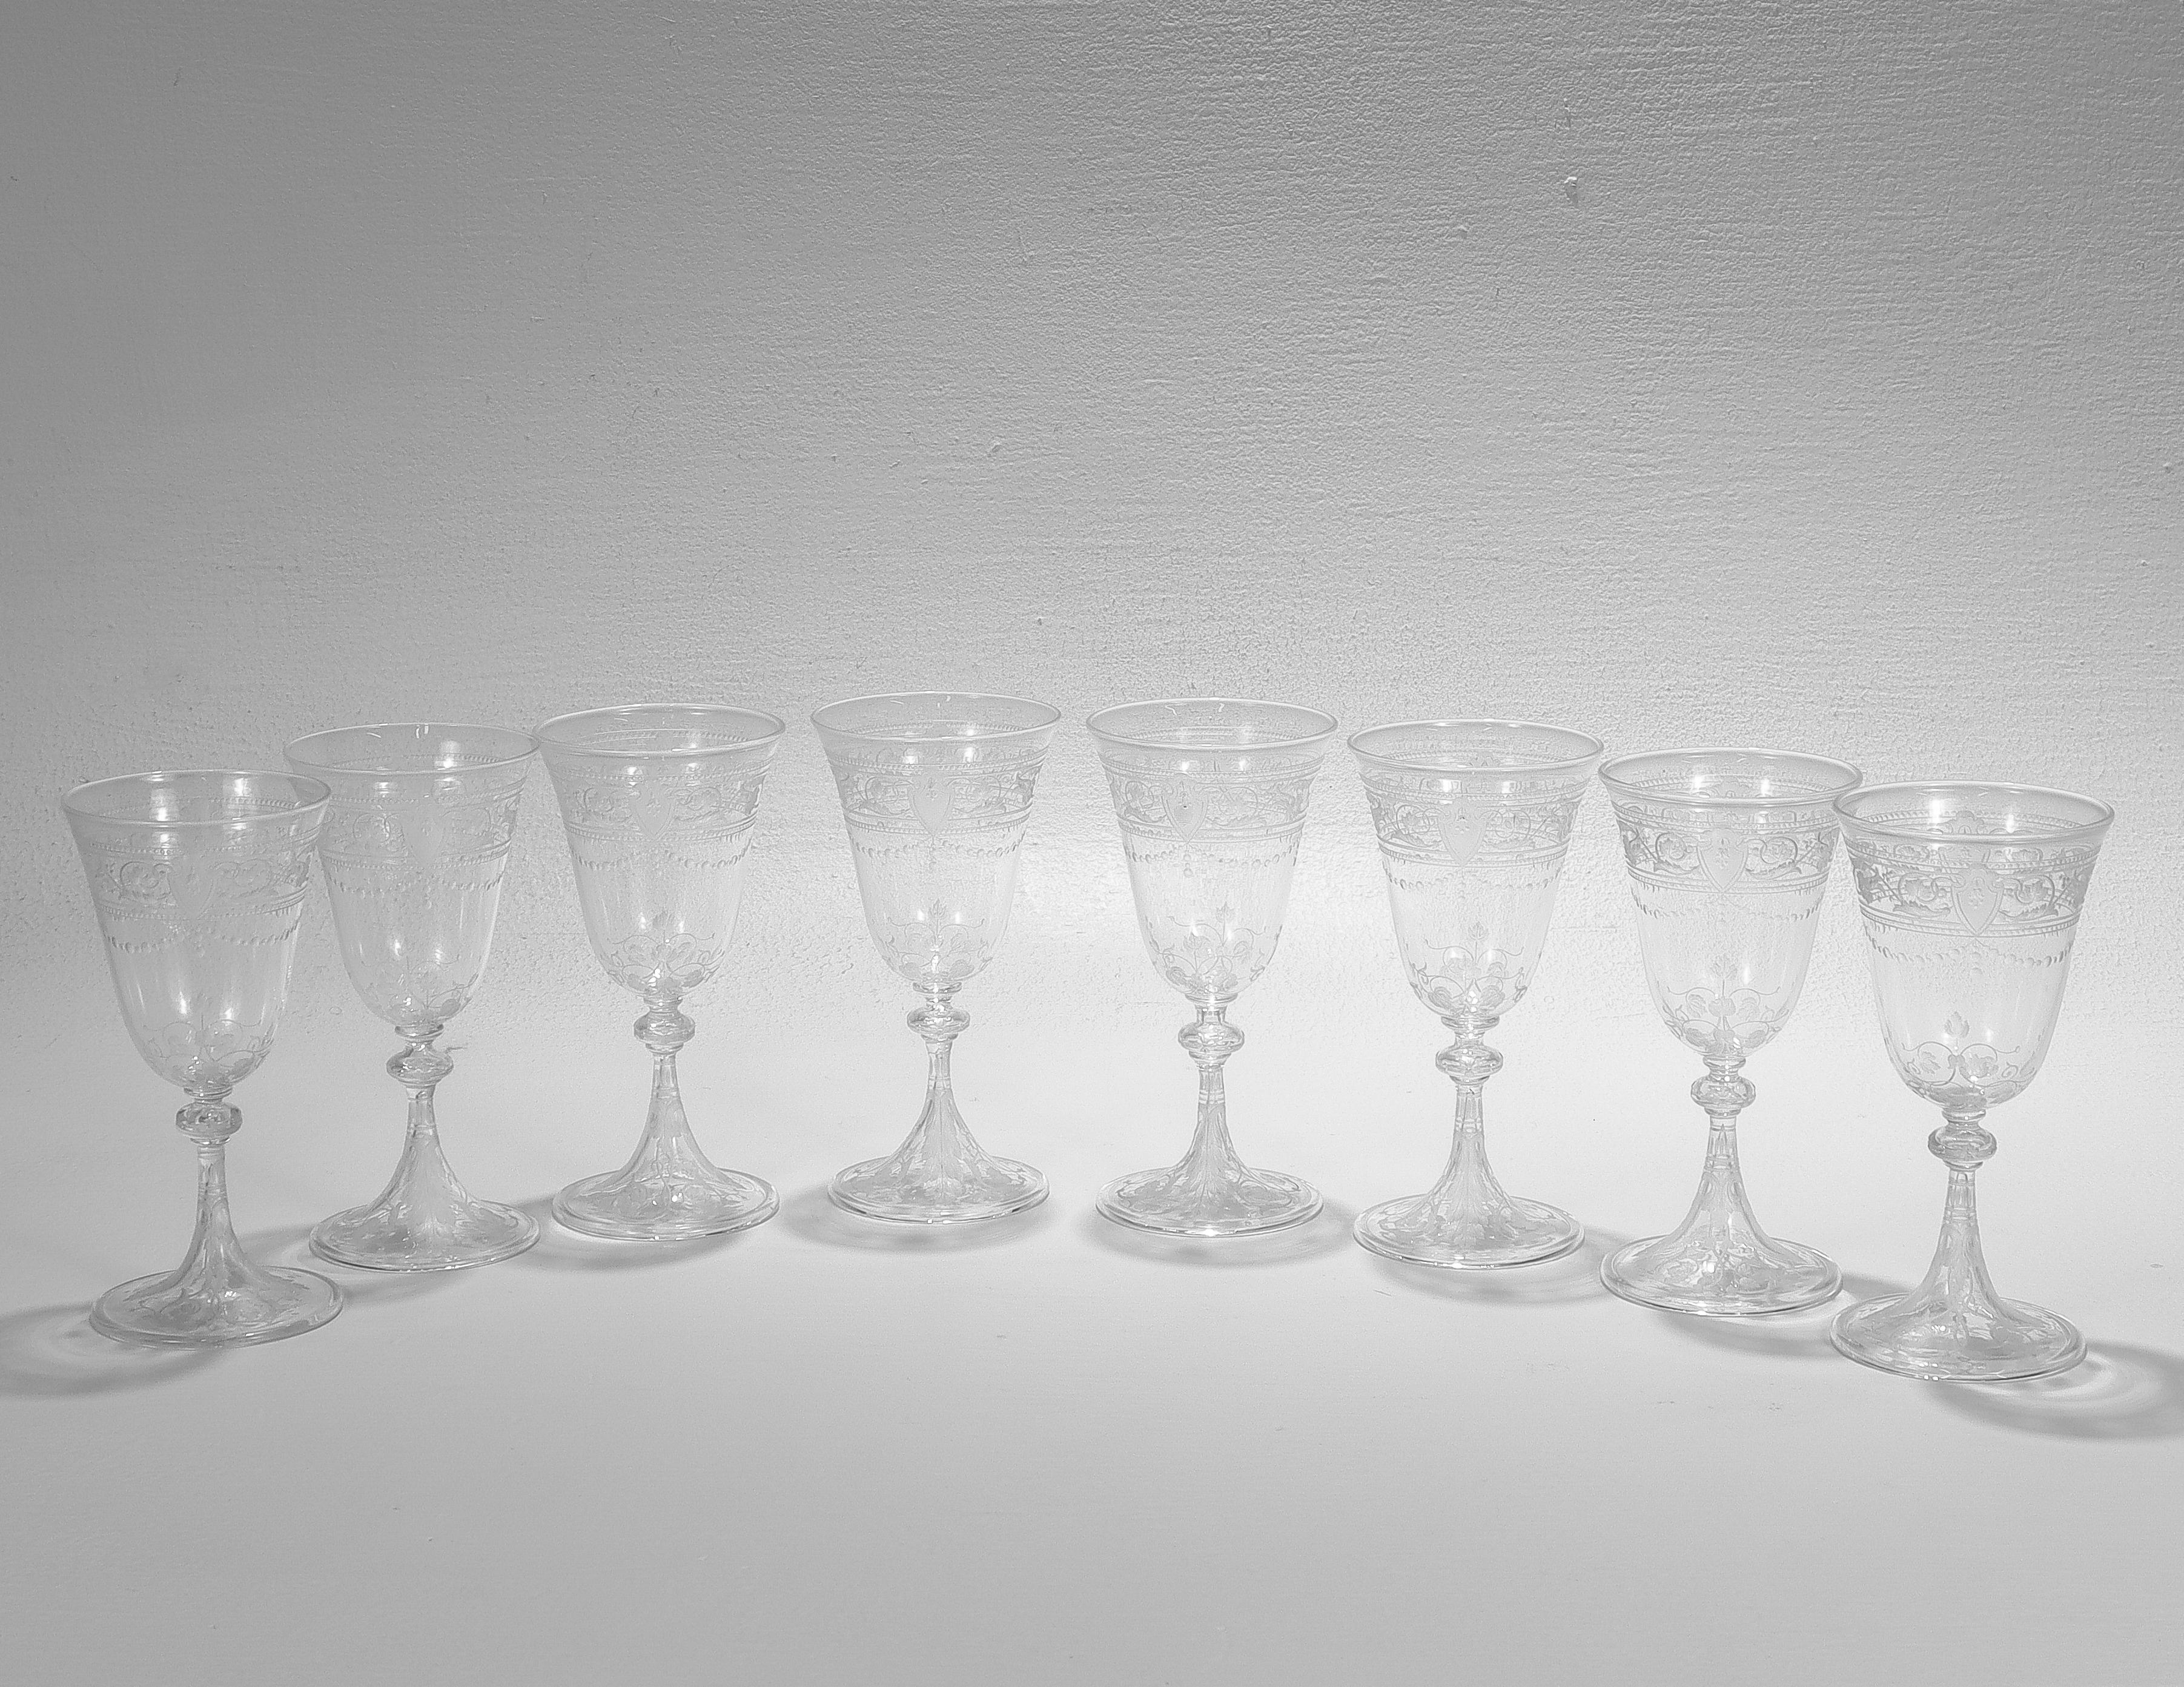 A fine set of antique etched and engraved glass wine glasses.

Attributed to Stevens & Williams or Webb.

With engraved & etched designs trelliswork, flowers, and shield devices.

Each with a shaped rim and curved handle.

Simply a wonderful